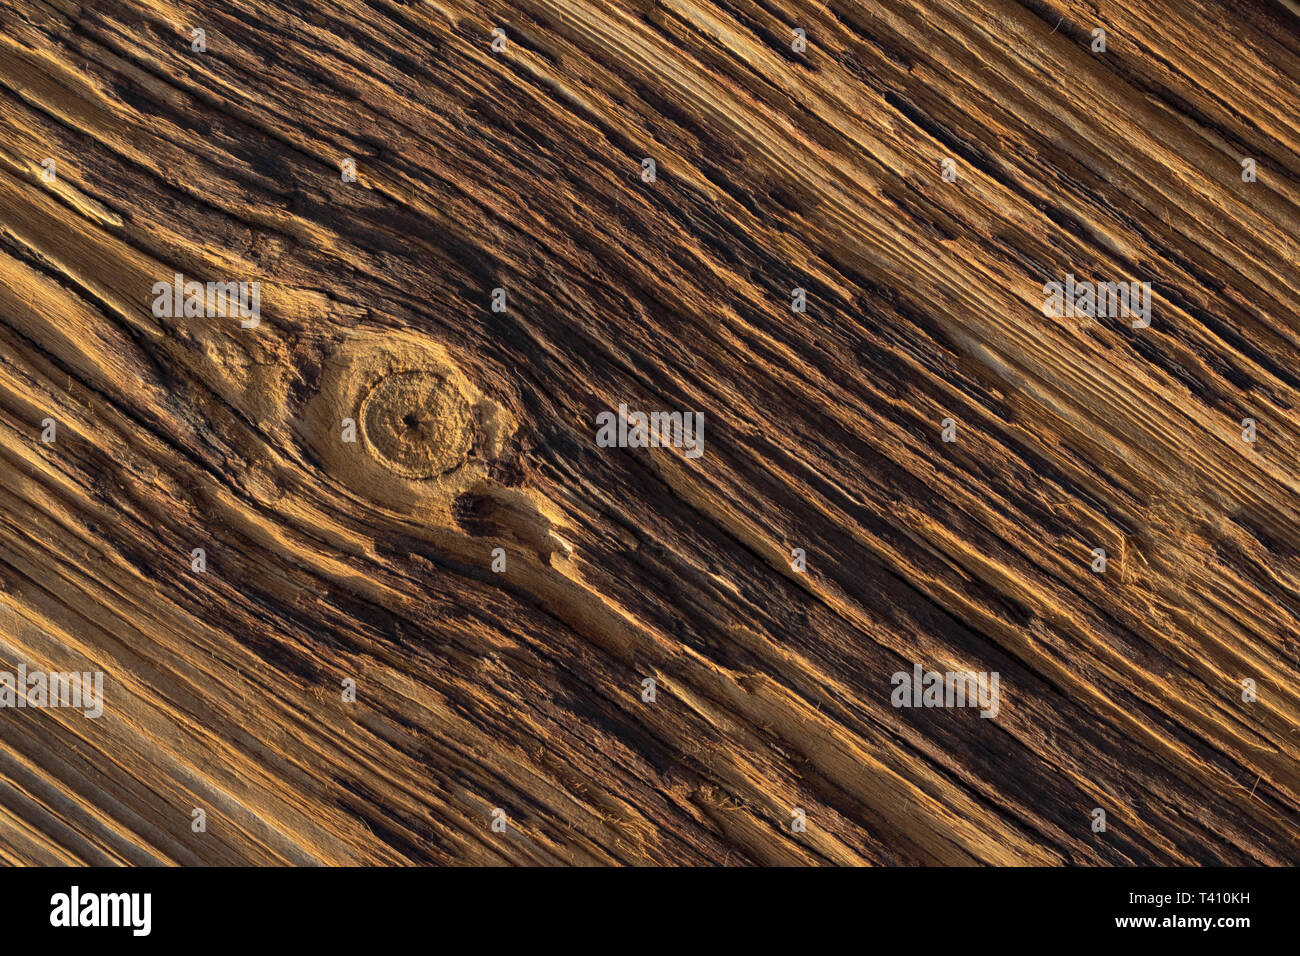 a deeply weathered textured old wooden board with with a single knot breaking the pattern Stock Photo